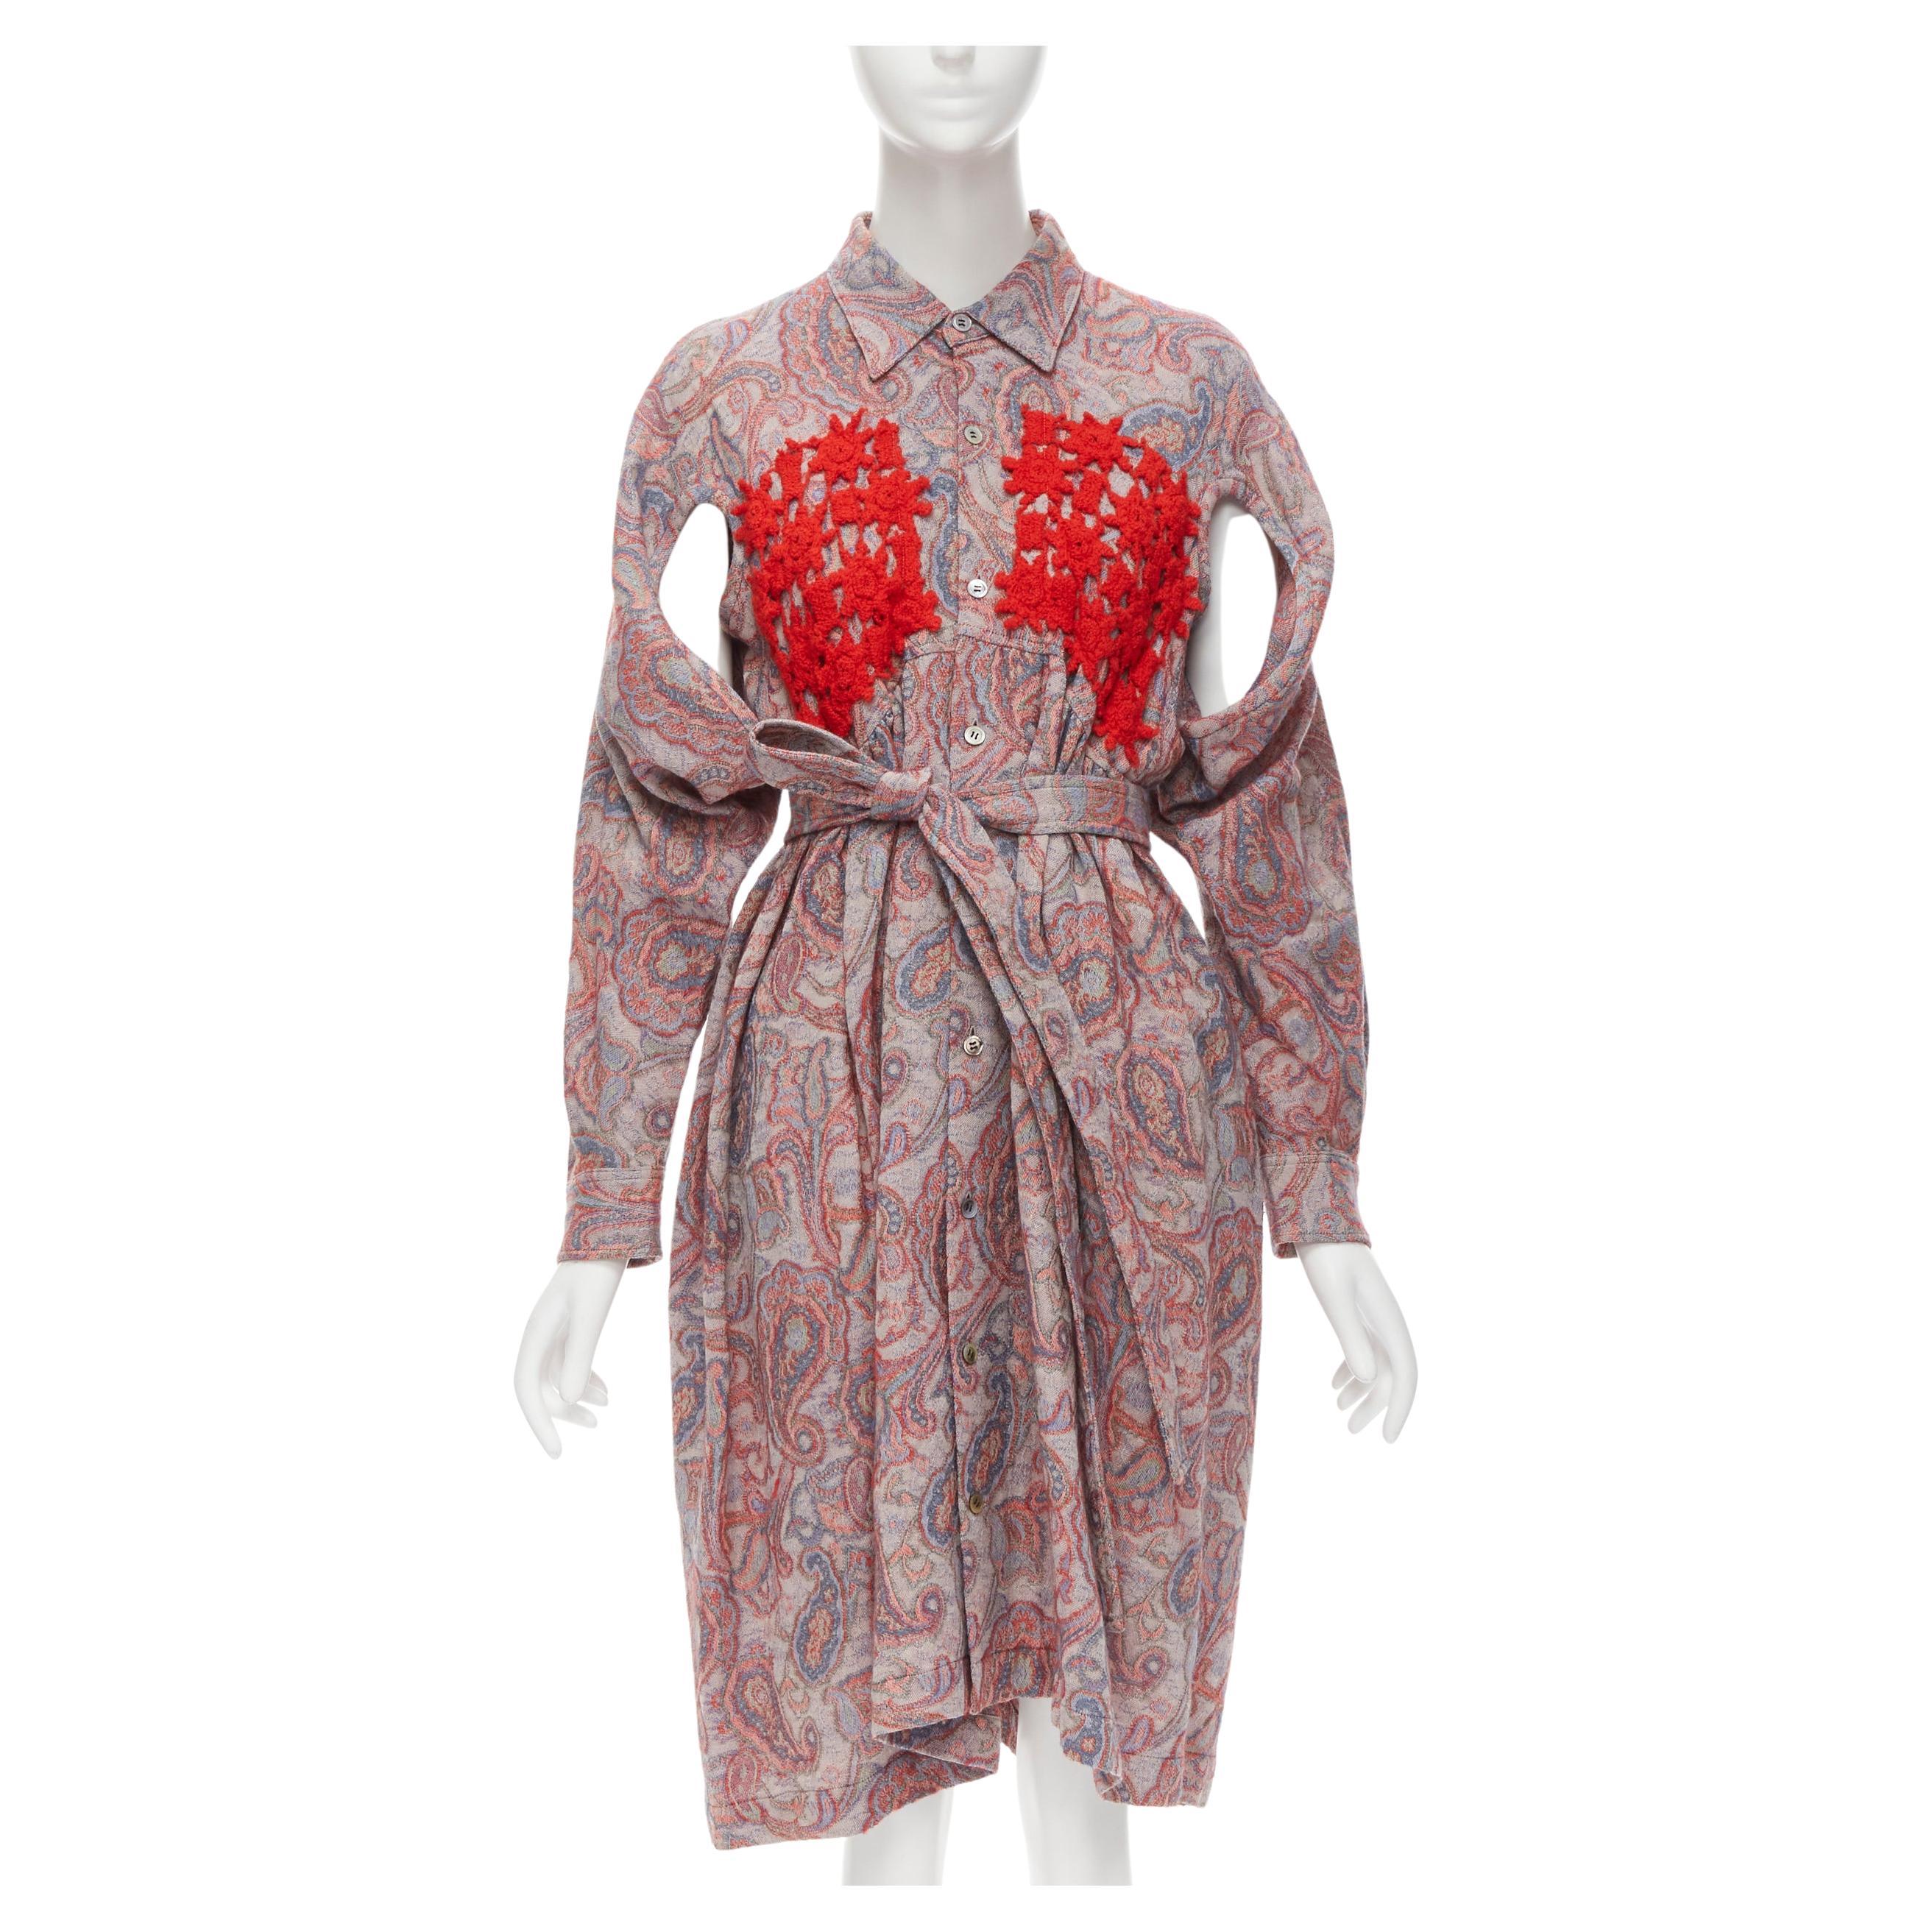 vintage COMME DES GARCONS 1988 red paisley embroidered belted moumou dress M